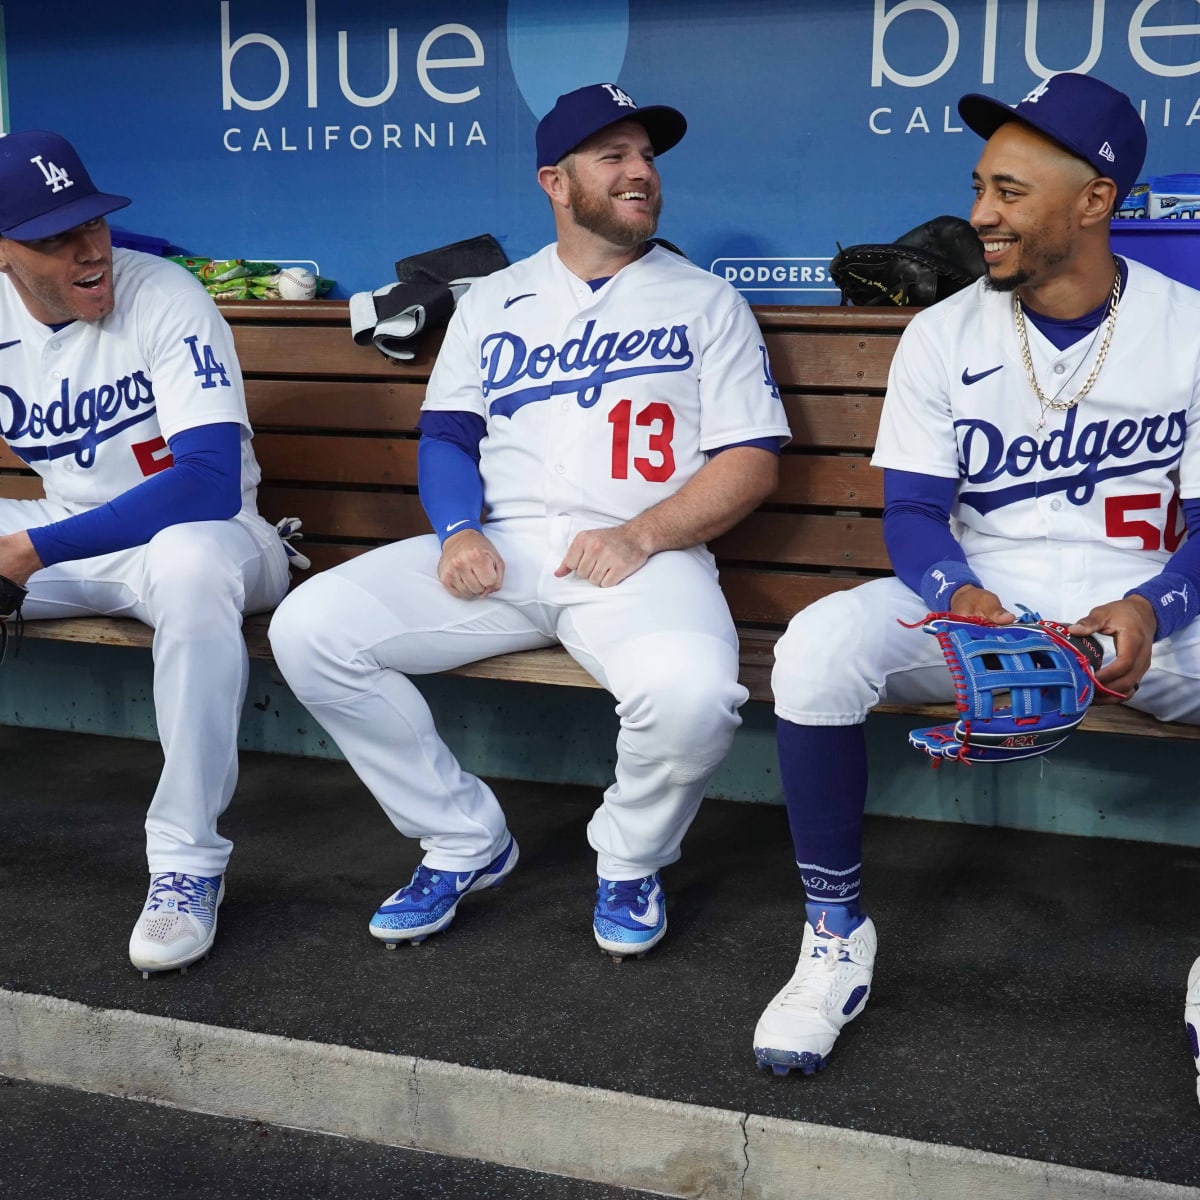 What to expect on home opening weekend at Dodger Stadium, by Rowan Kavner